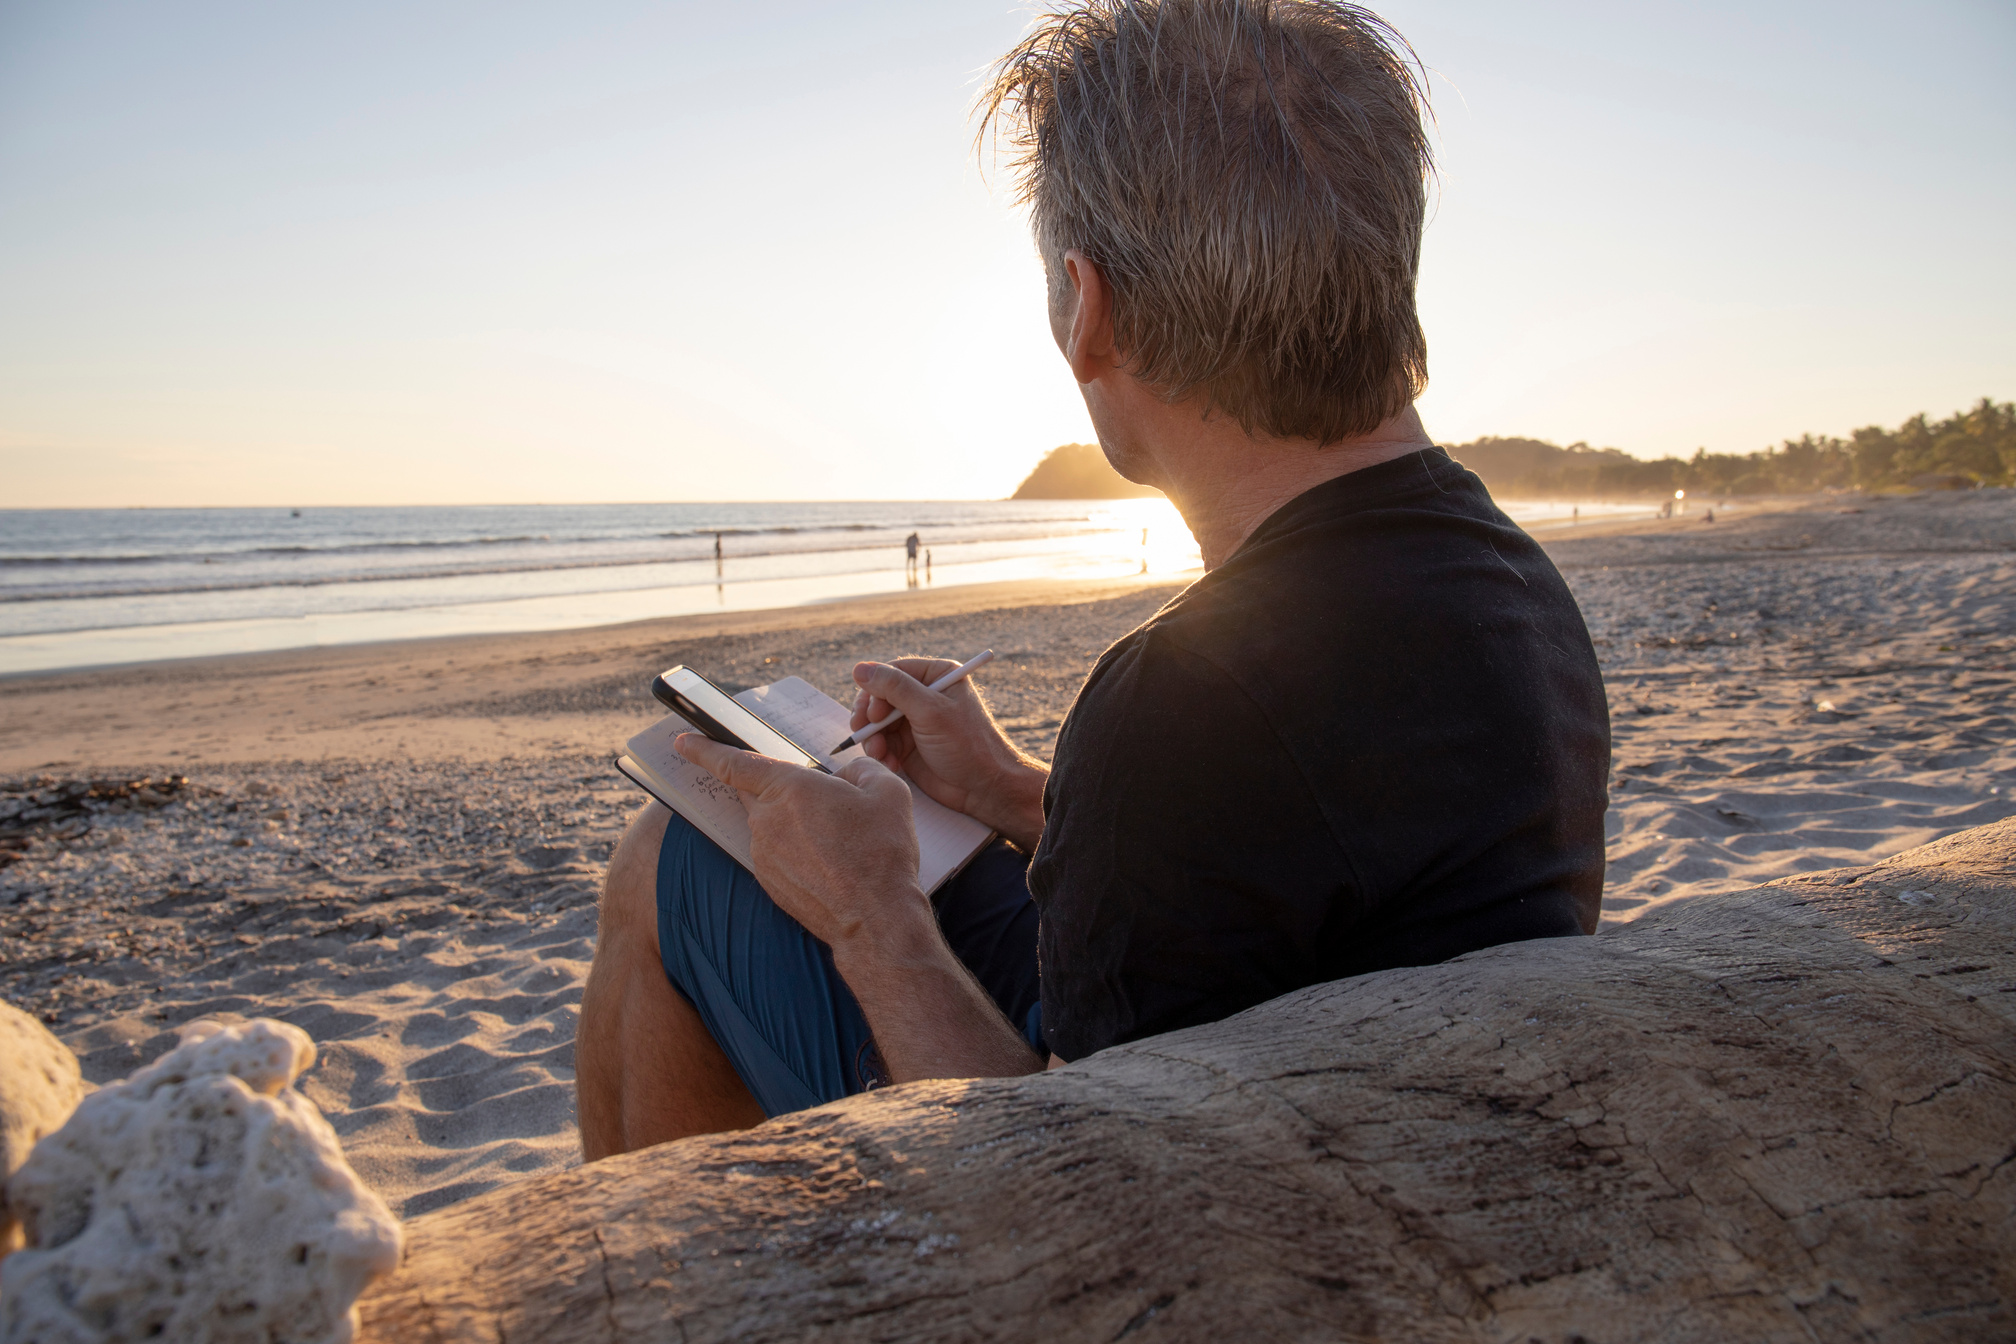 Man relaxes on beach, writes in journal